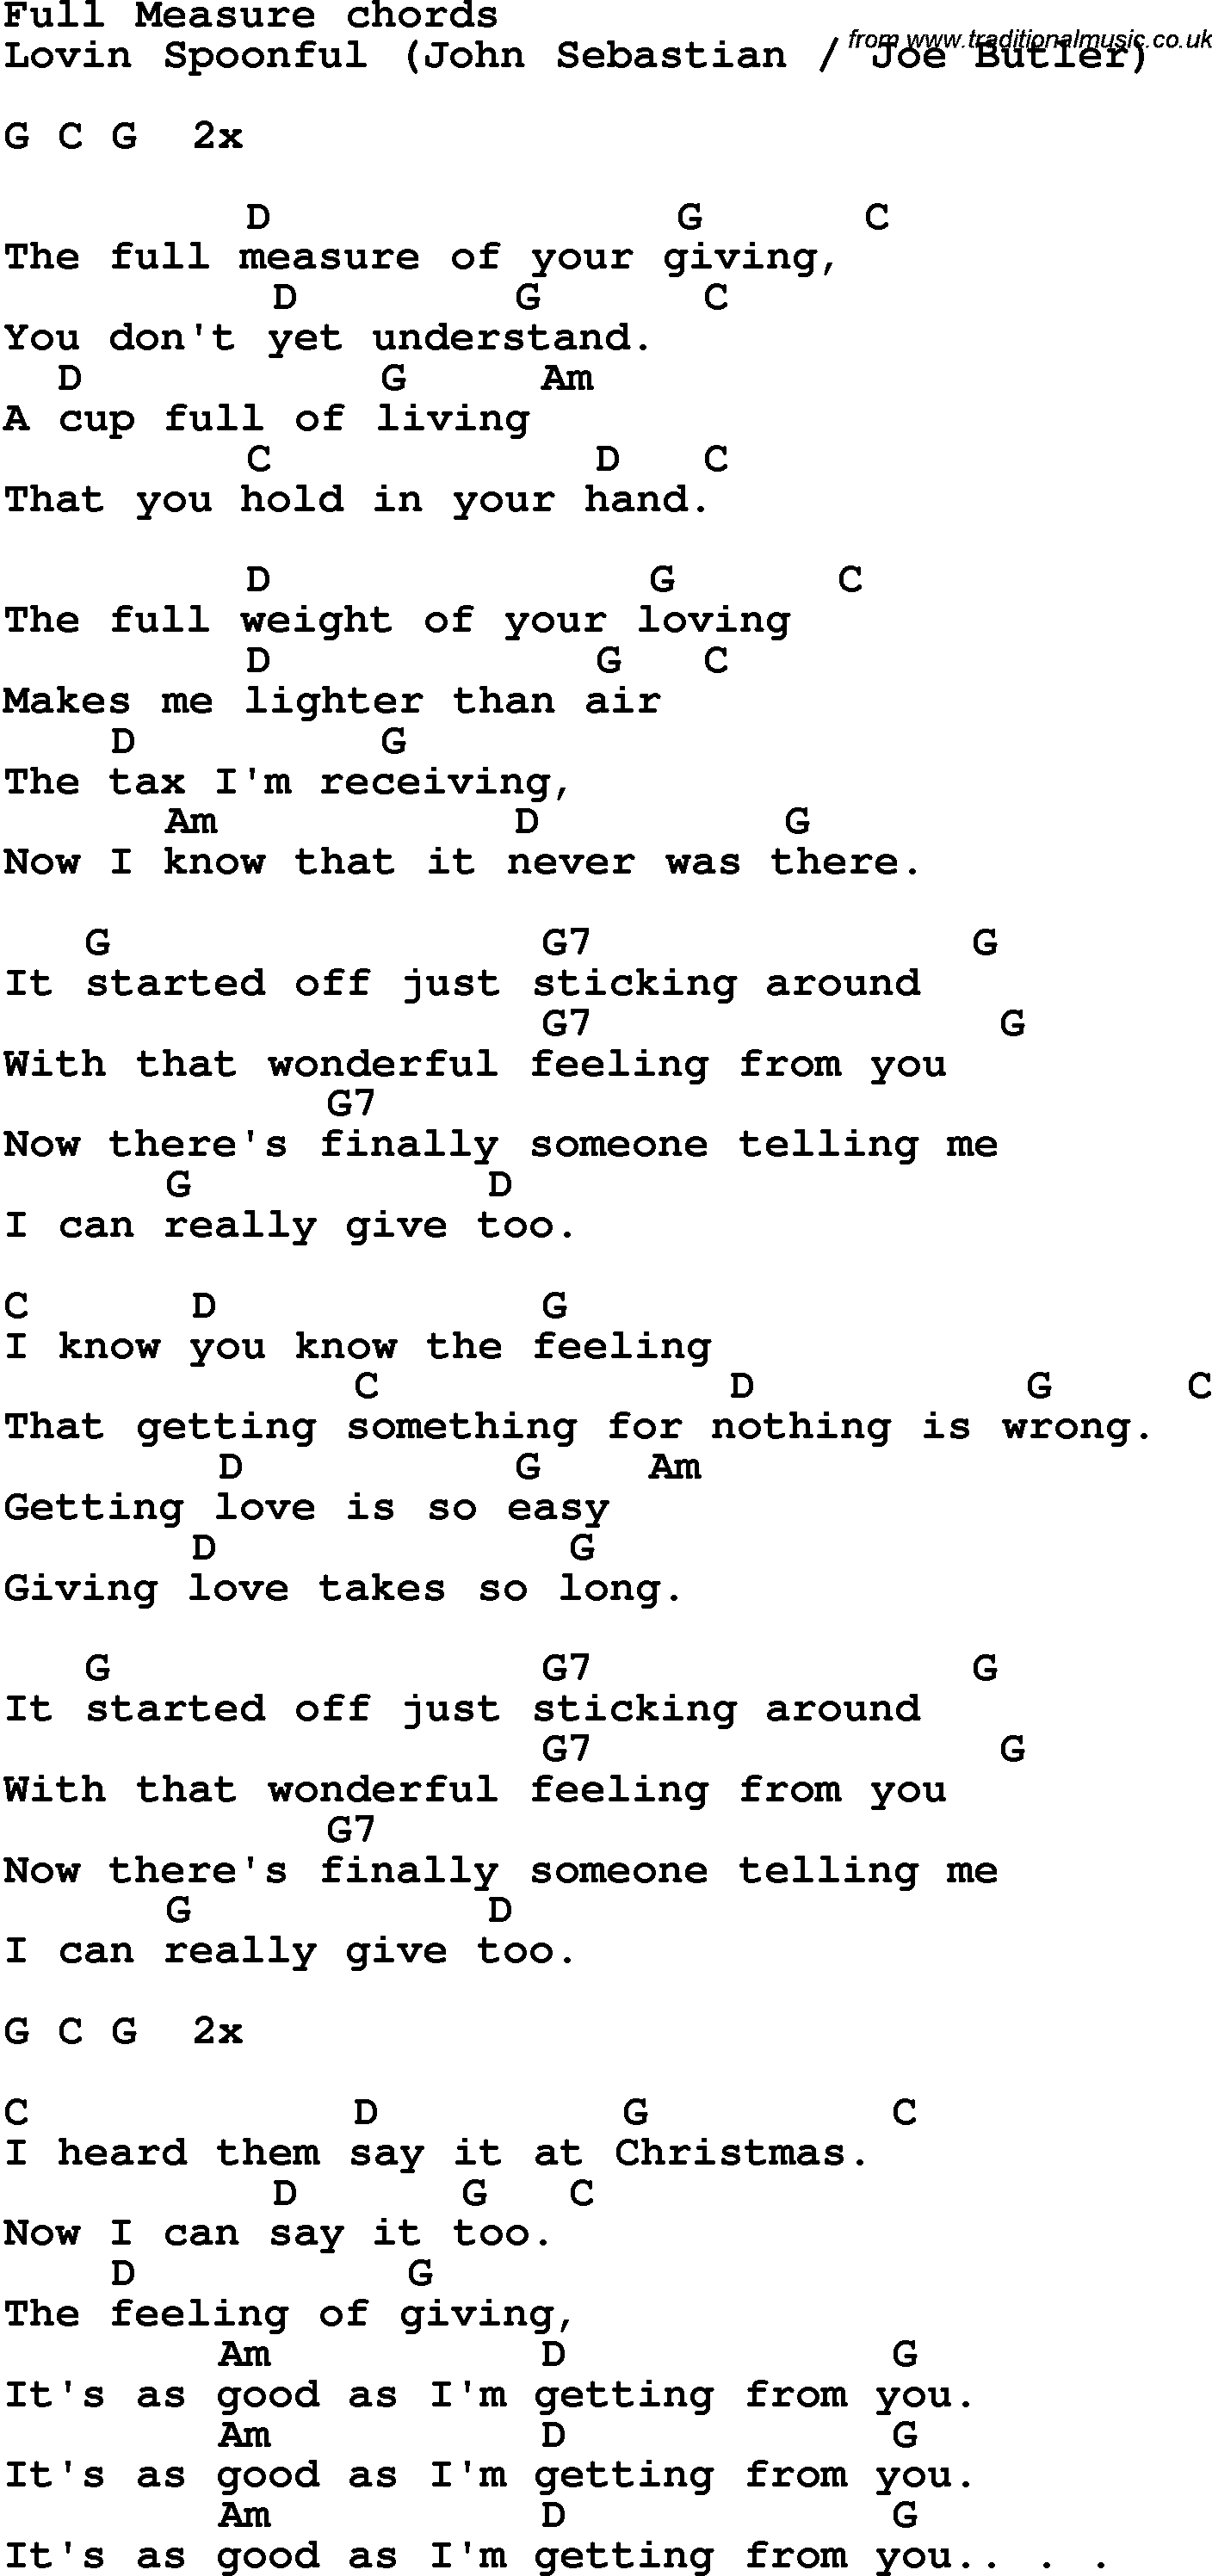 Song Lyrics with guitar chords for Full Measure